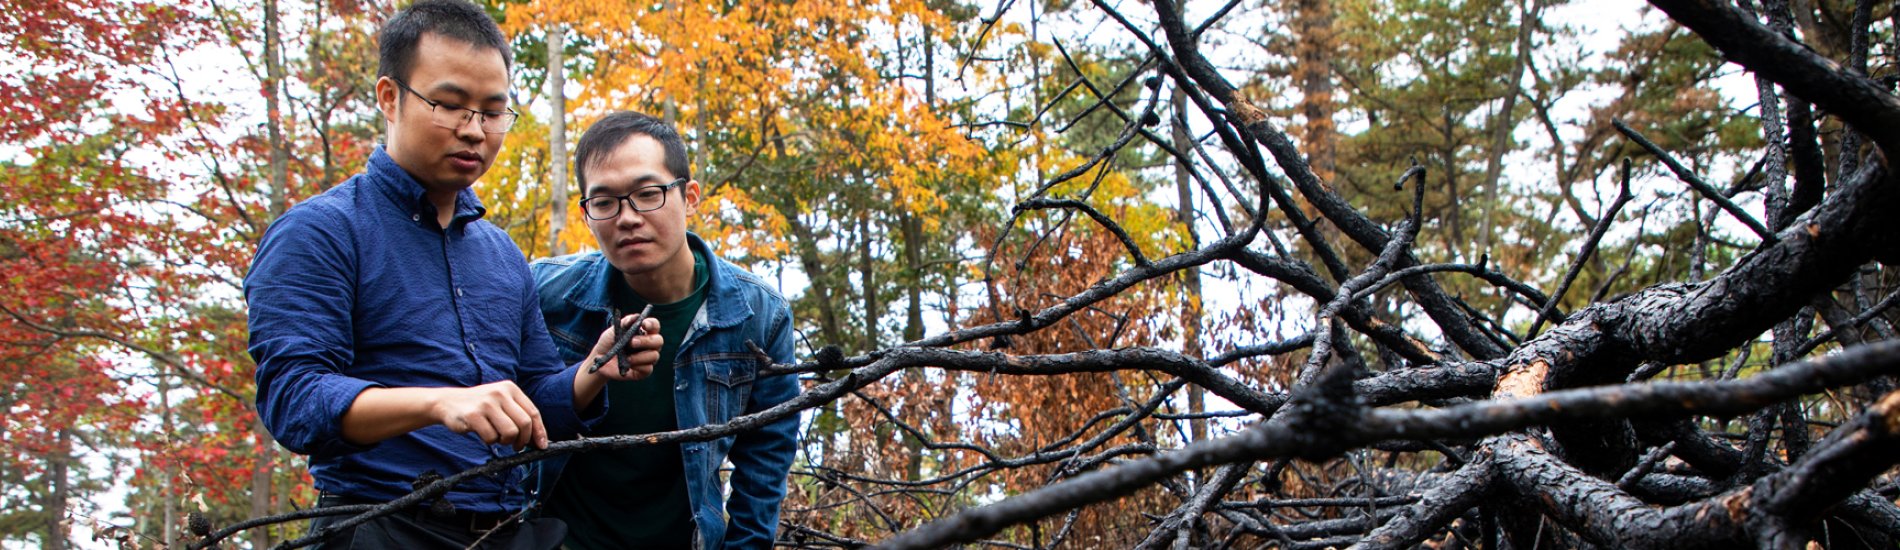 UAlbany Environmental and Sustainable Engineering researchers study how enzymes degrade charcoal from fires in Albany's Pine Bush preserve.